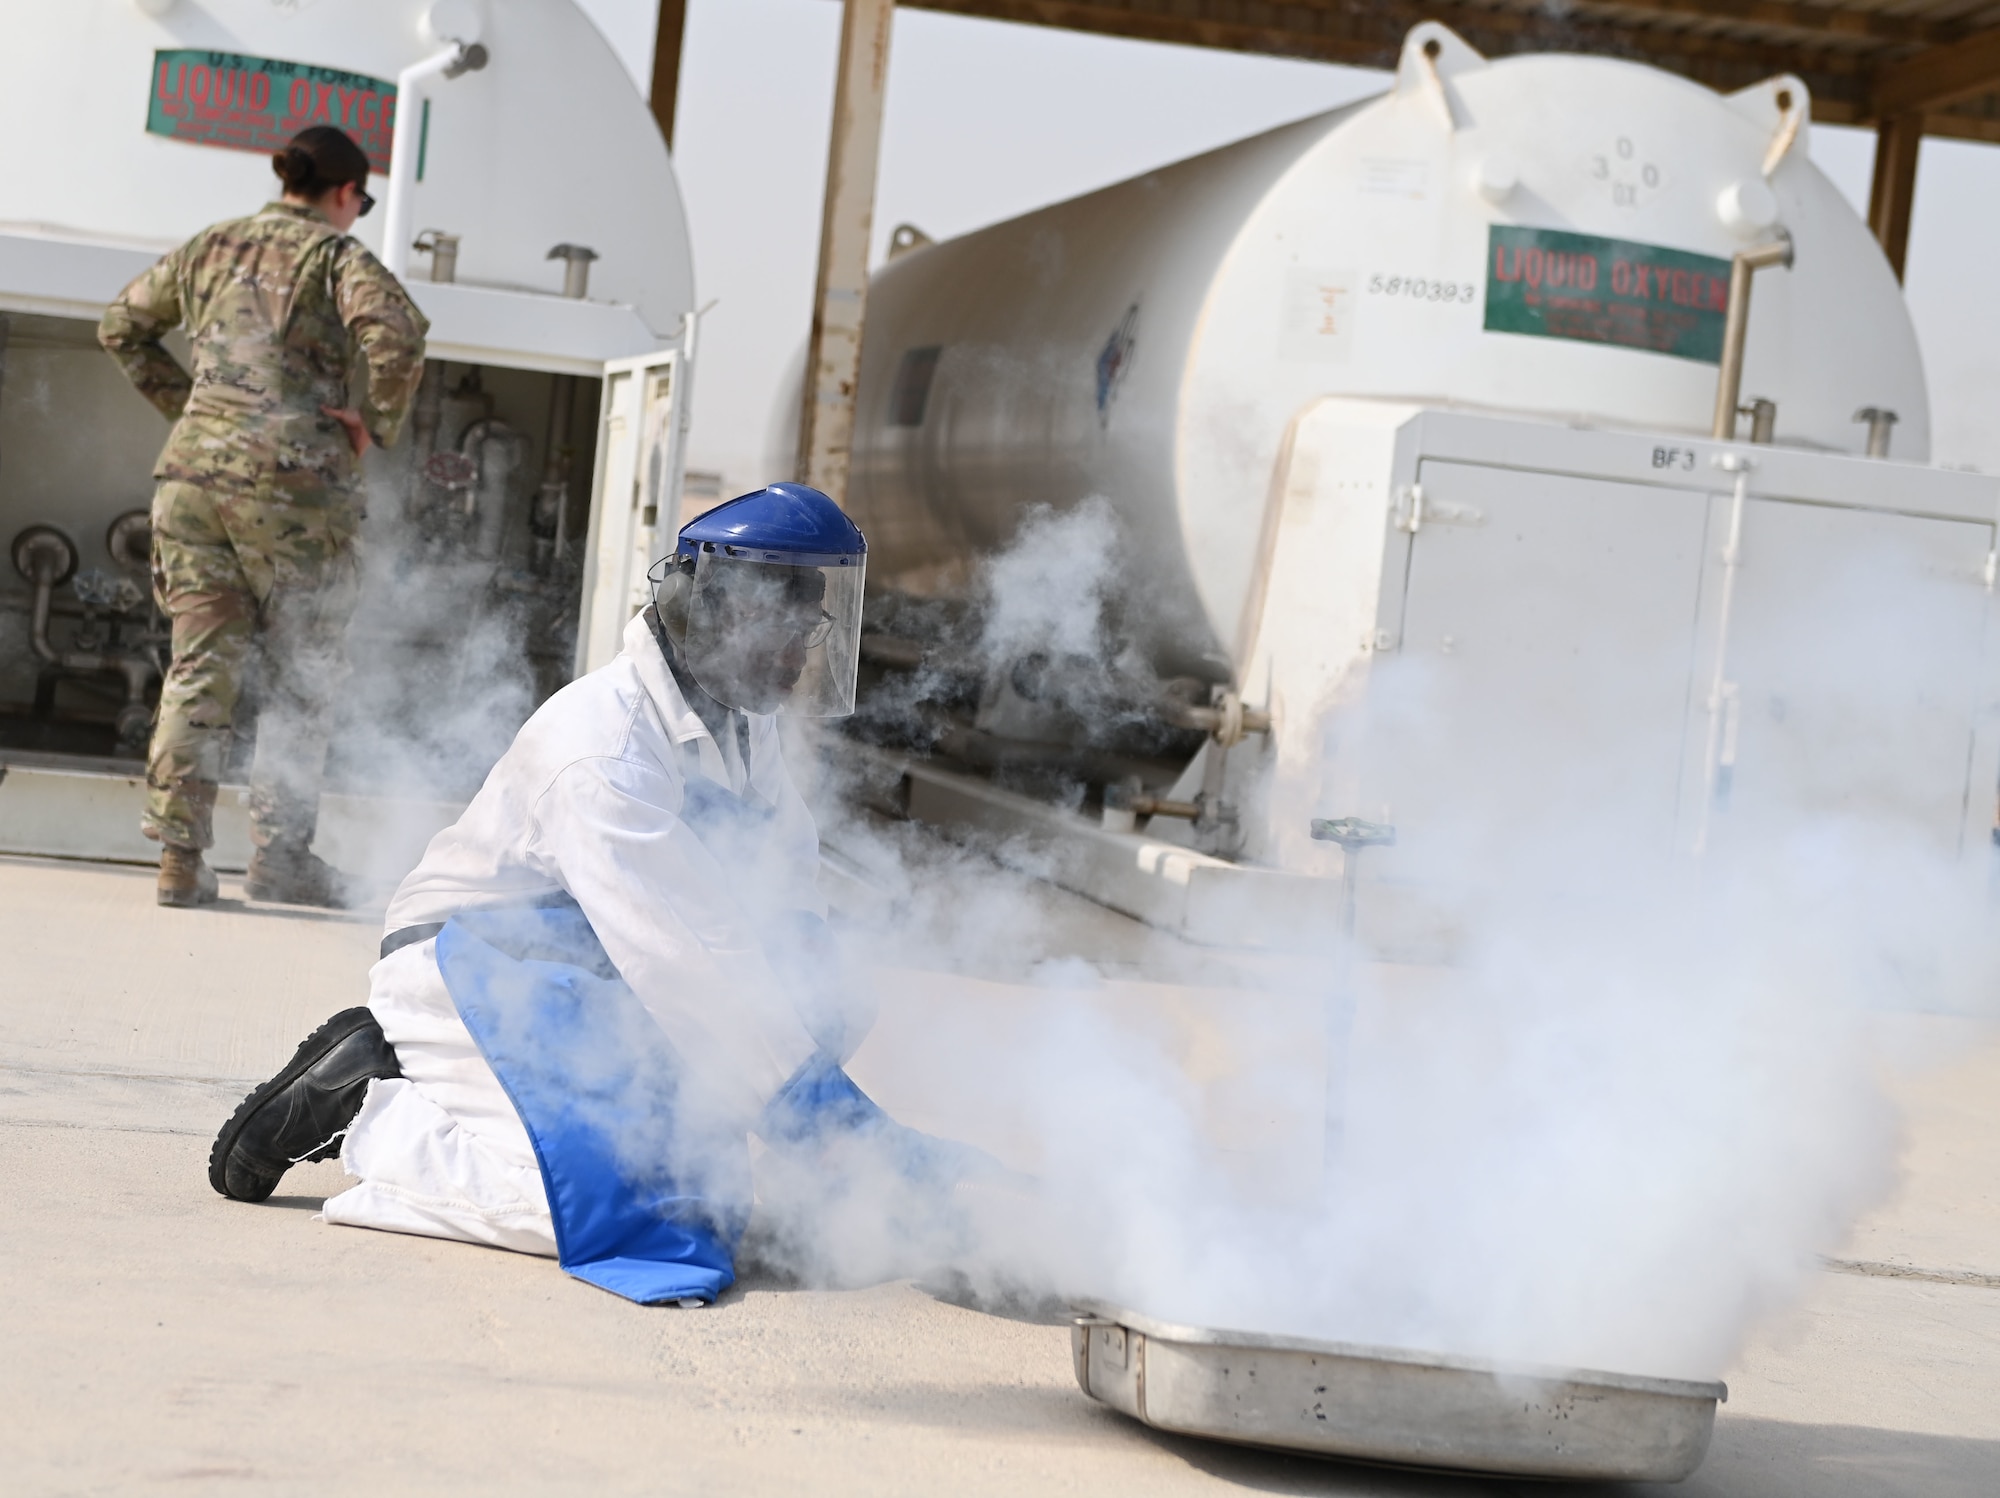 U.S. Air Force Senior Airman Dorian Longmire, a 379th Logistics Readiness Squadron petroleum oil lubricants specialist, purges a hose of liquid oxygen during a quality control test Aug 11, 2022 at Al Udeid Airbase, Qatar. Liquid oxygen is used in aircraft and breathing apparatus’s for aircrew. (U.S. Air National Guard photo by Master Sgt. Michael J. Kelly)